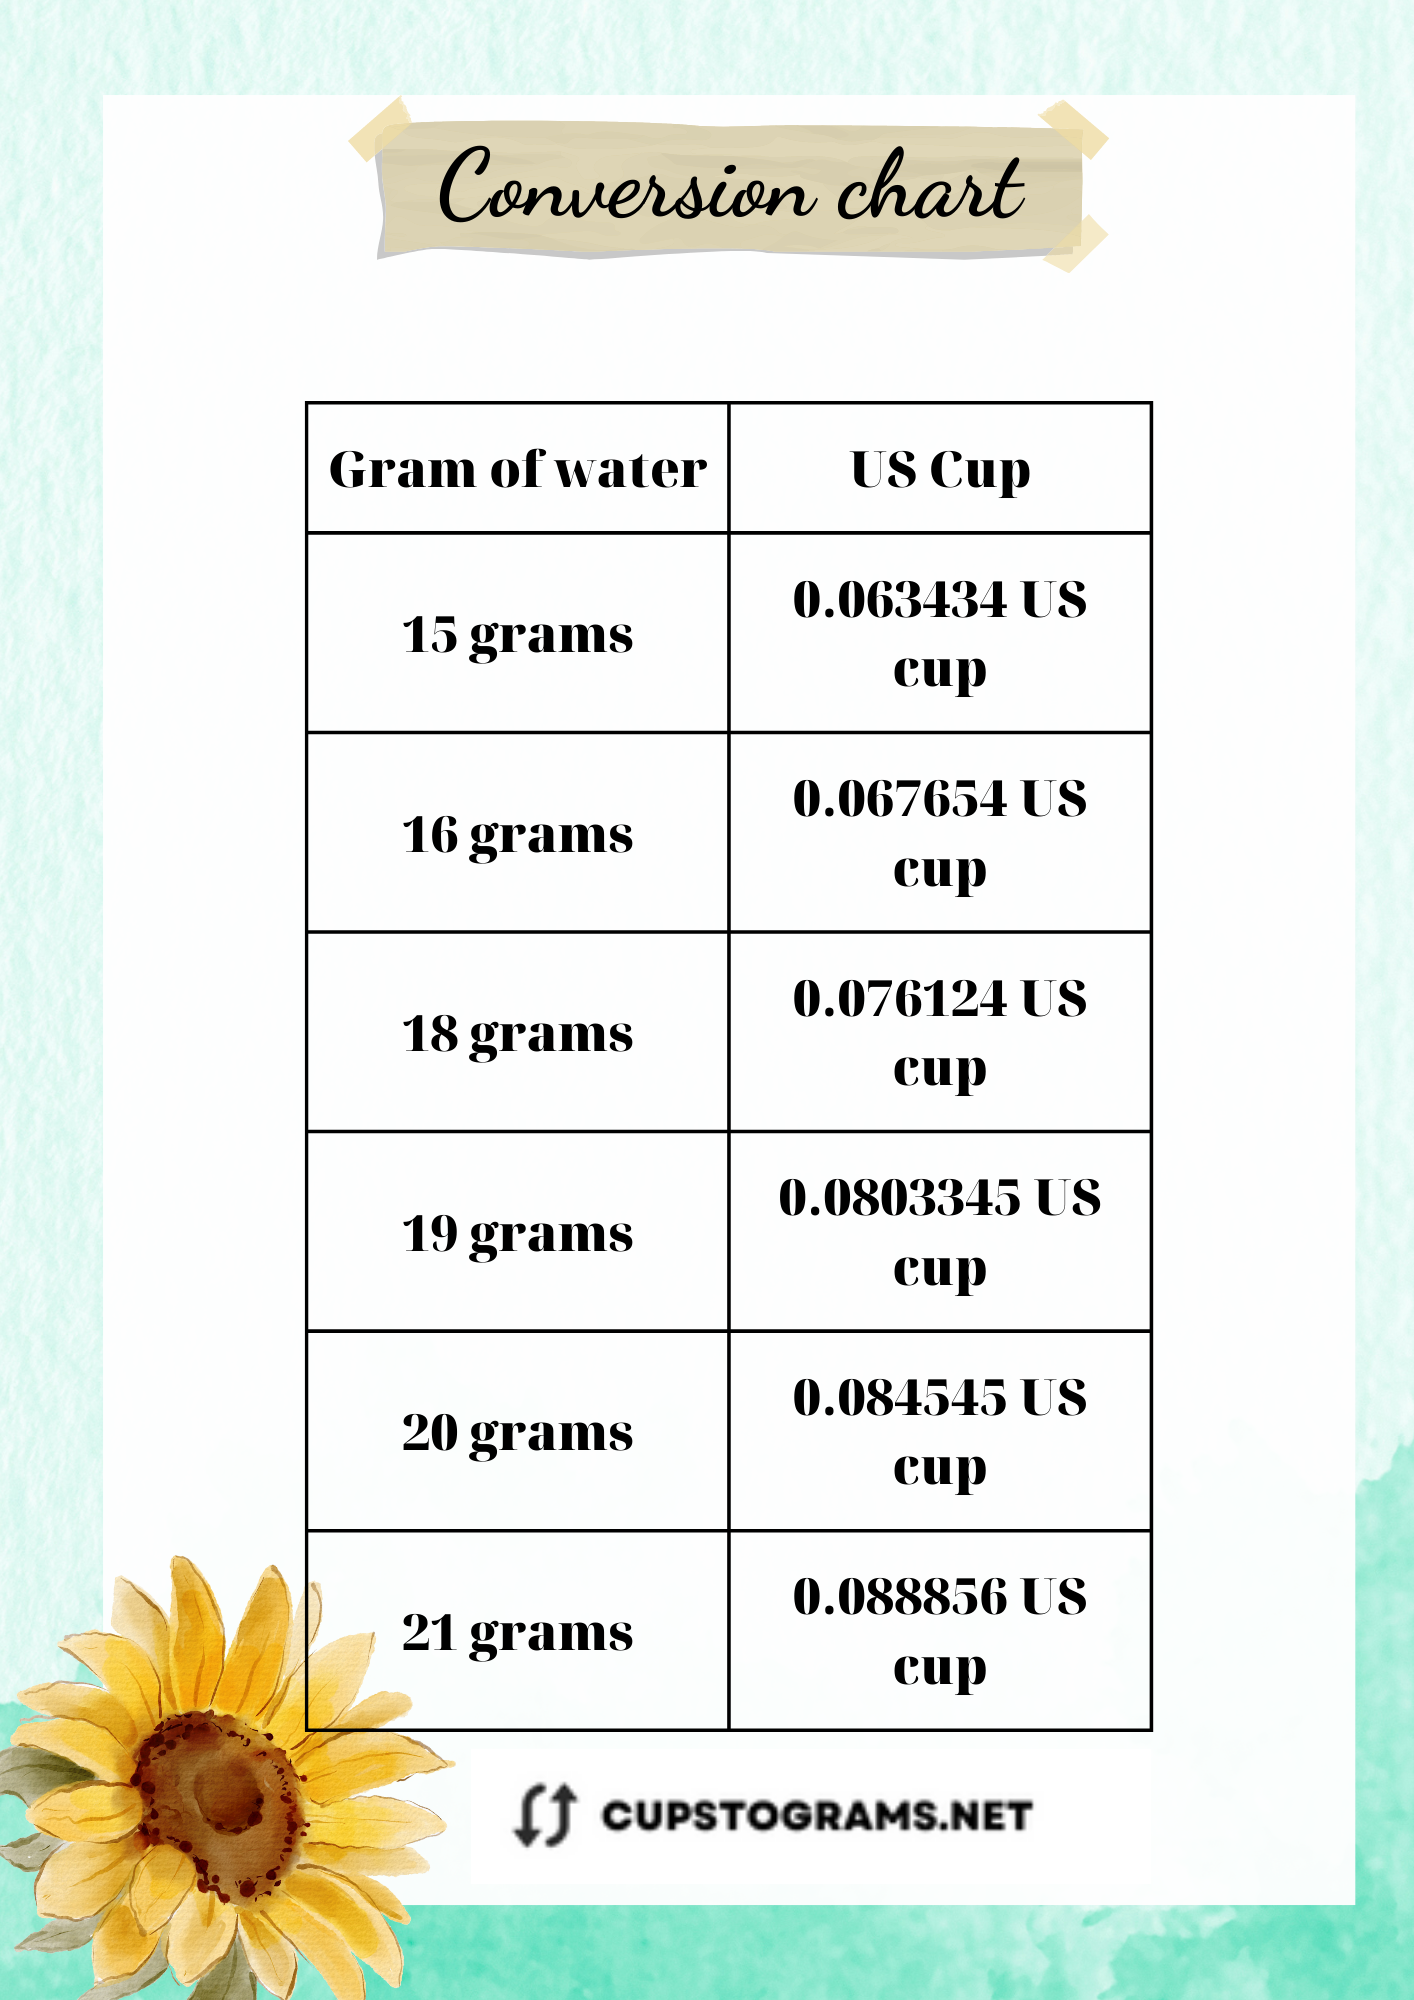 15 Grams Water Conversion Chart for US Cups